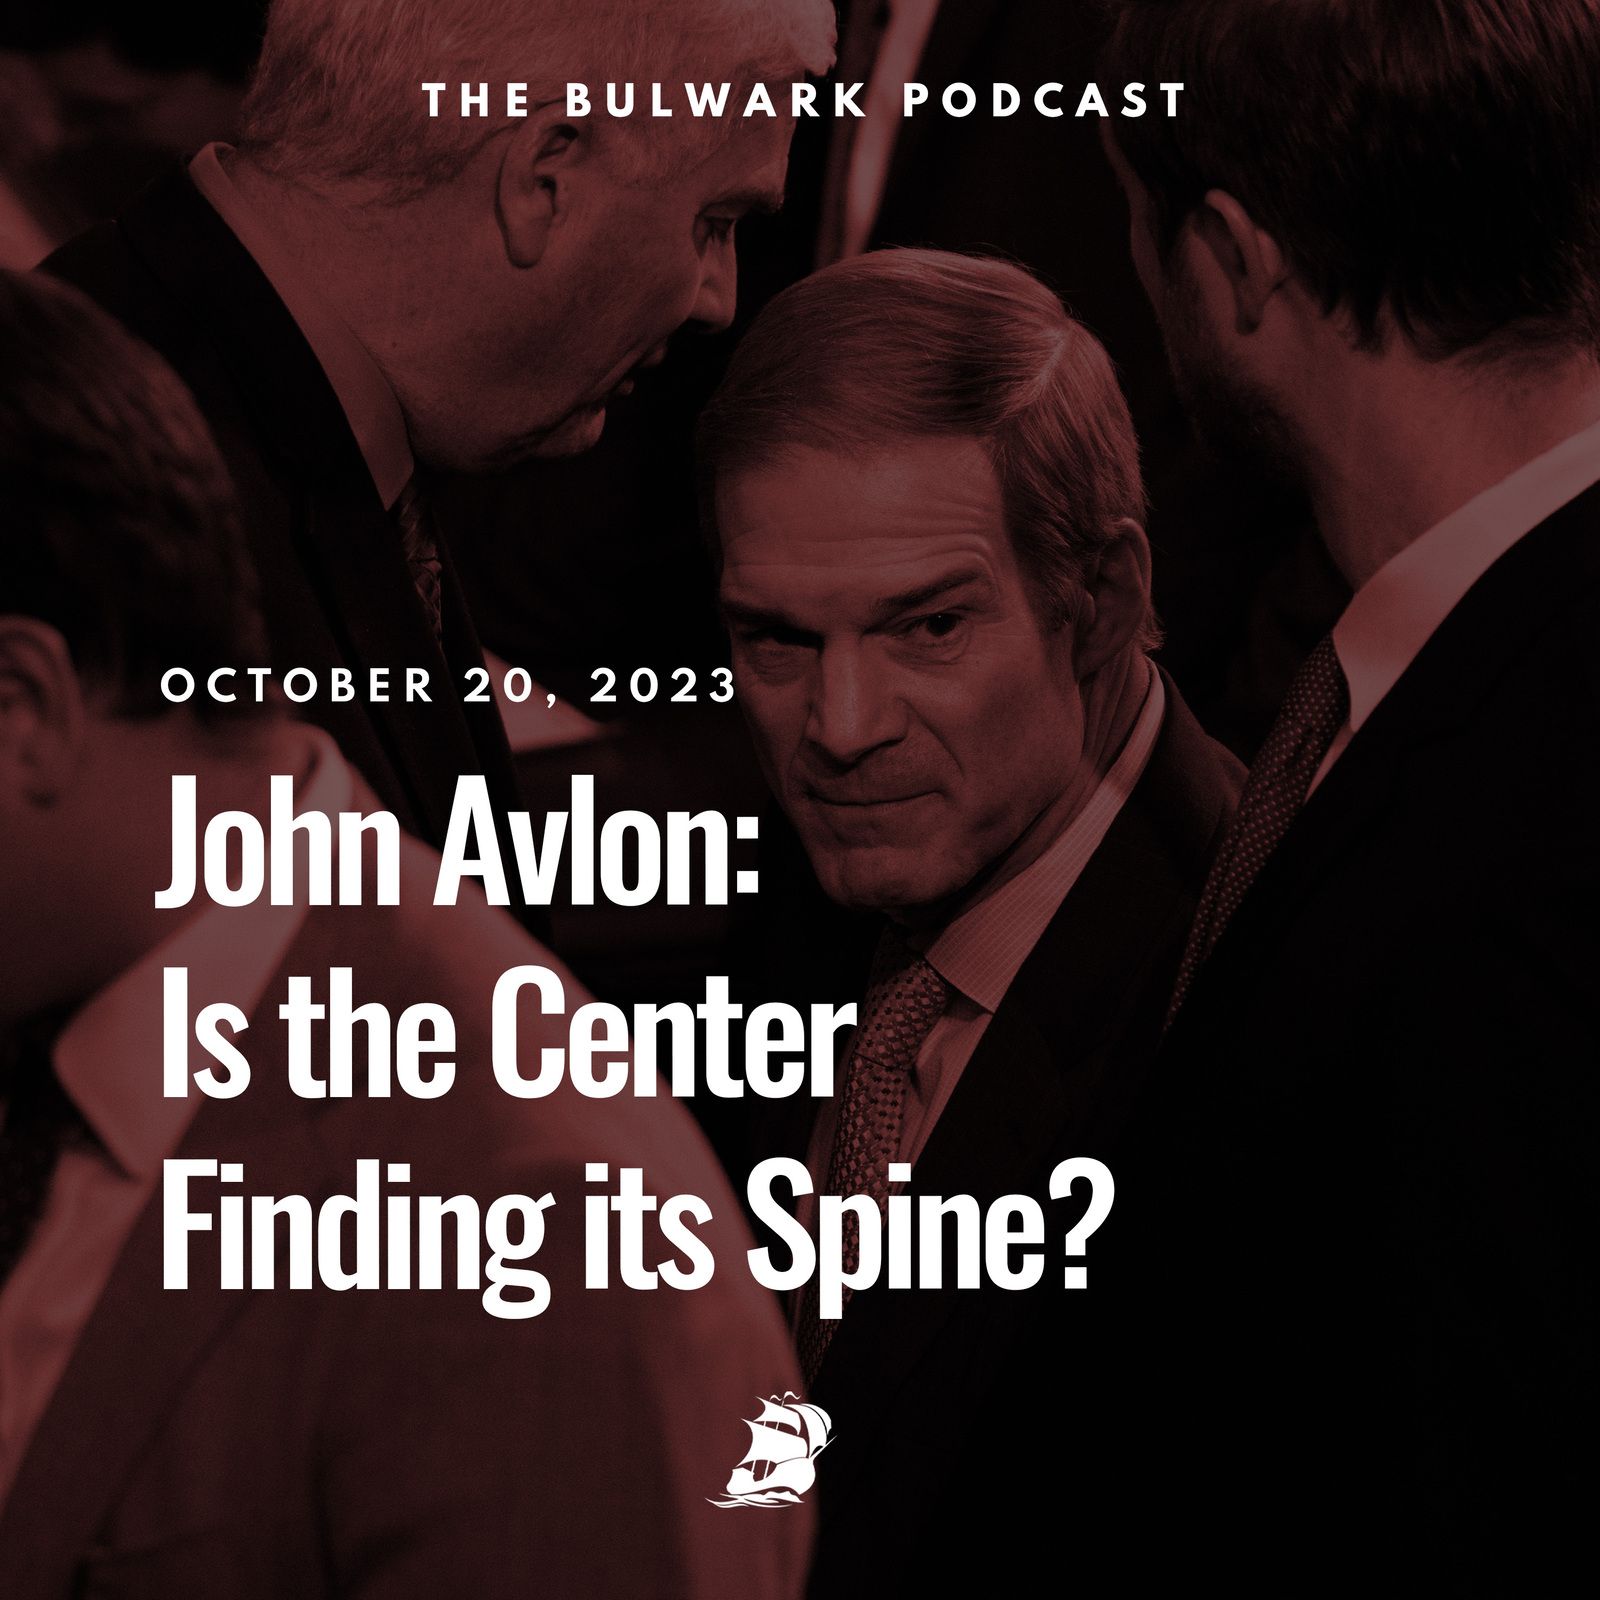 John Avlon: Is the Center Finding Its Spine? by The Bulwark Podcast